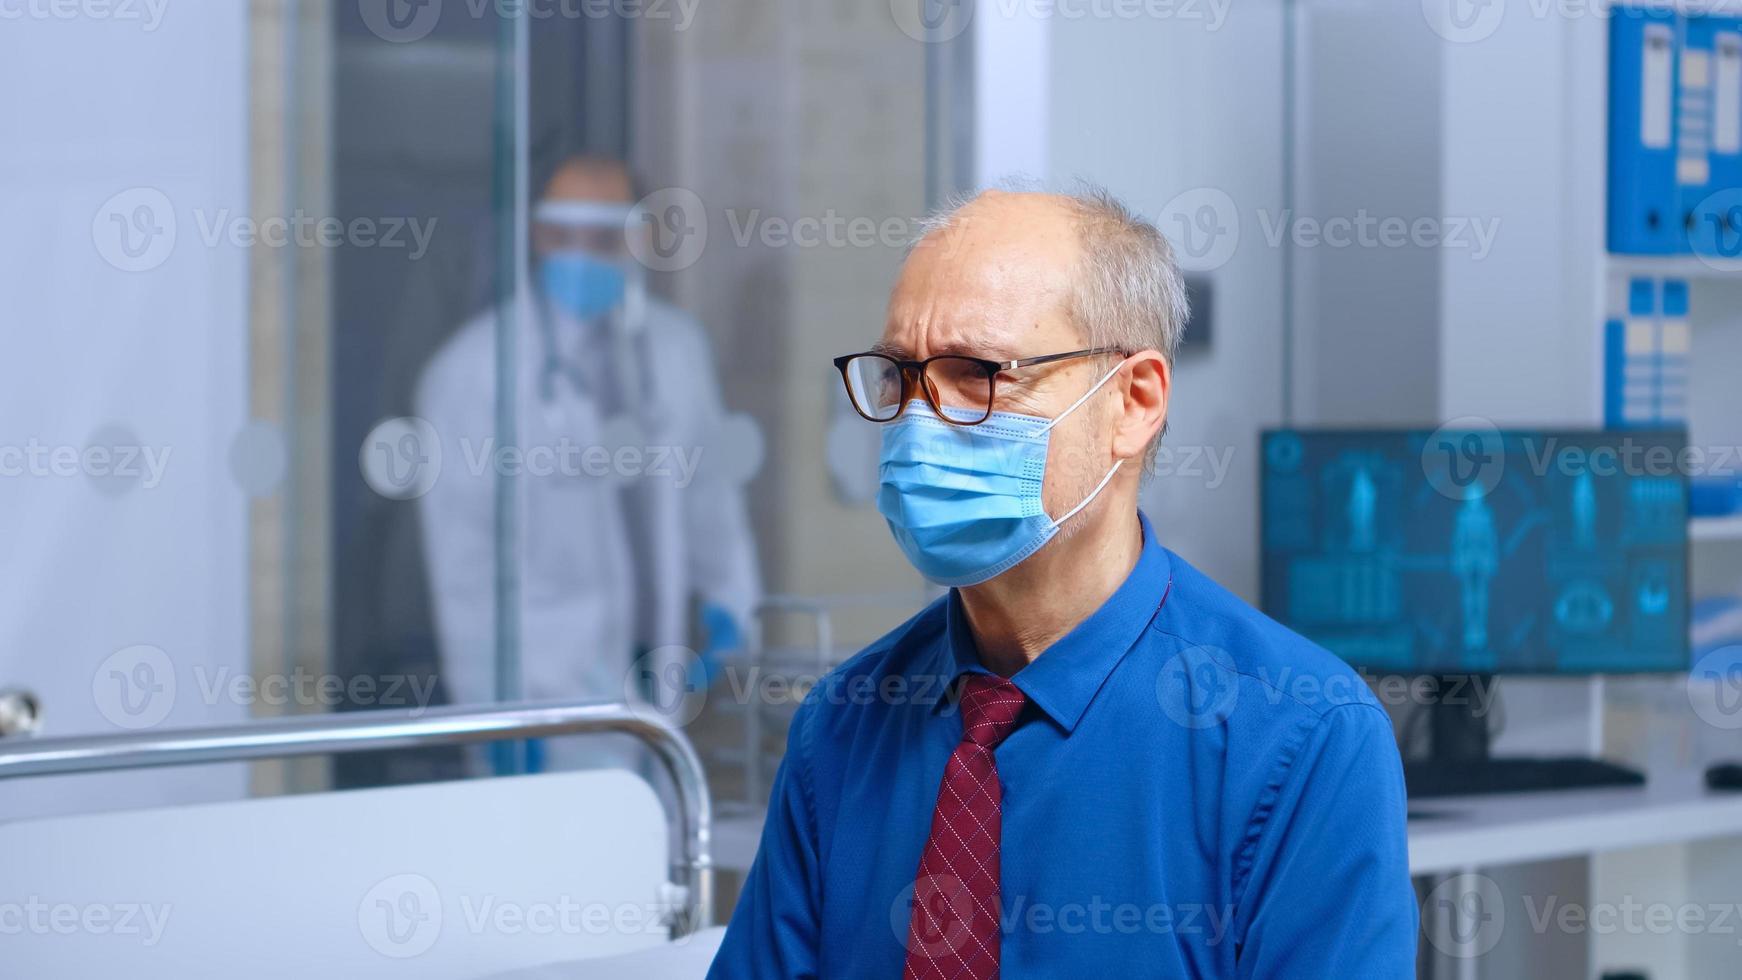 Worried senior patient with a mask photo